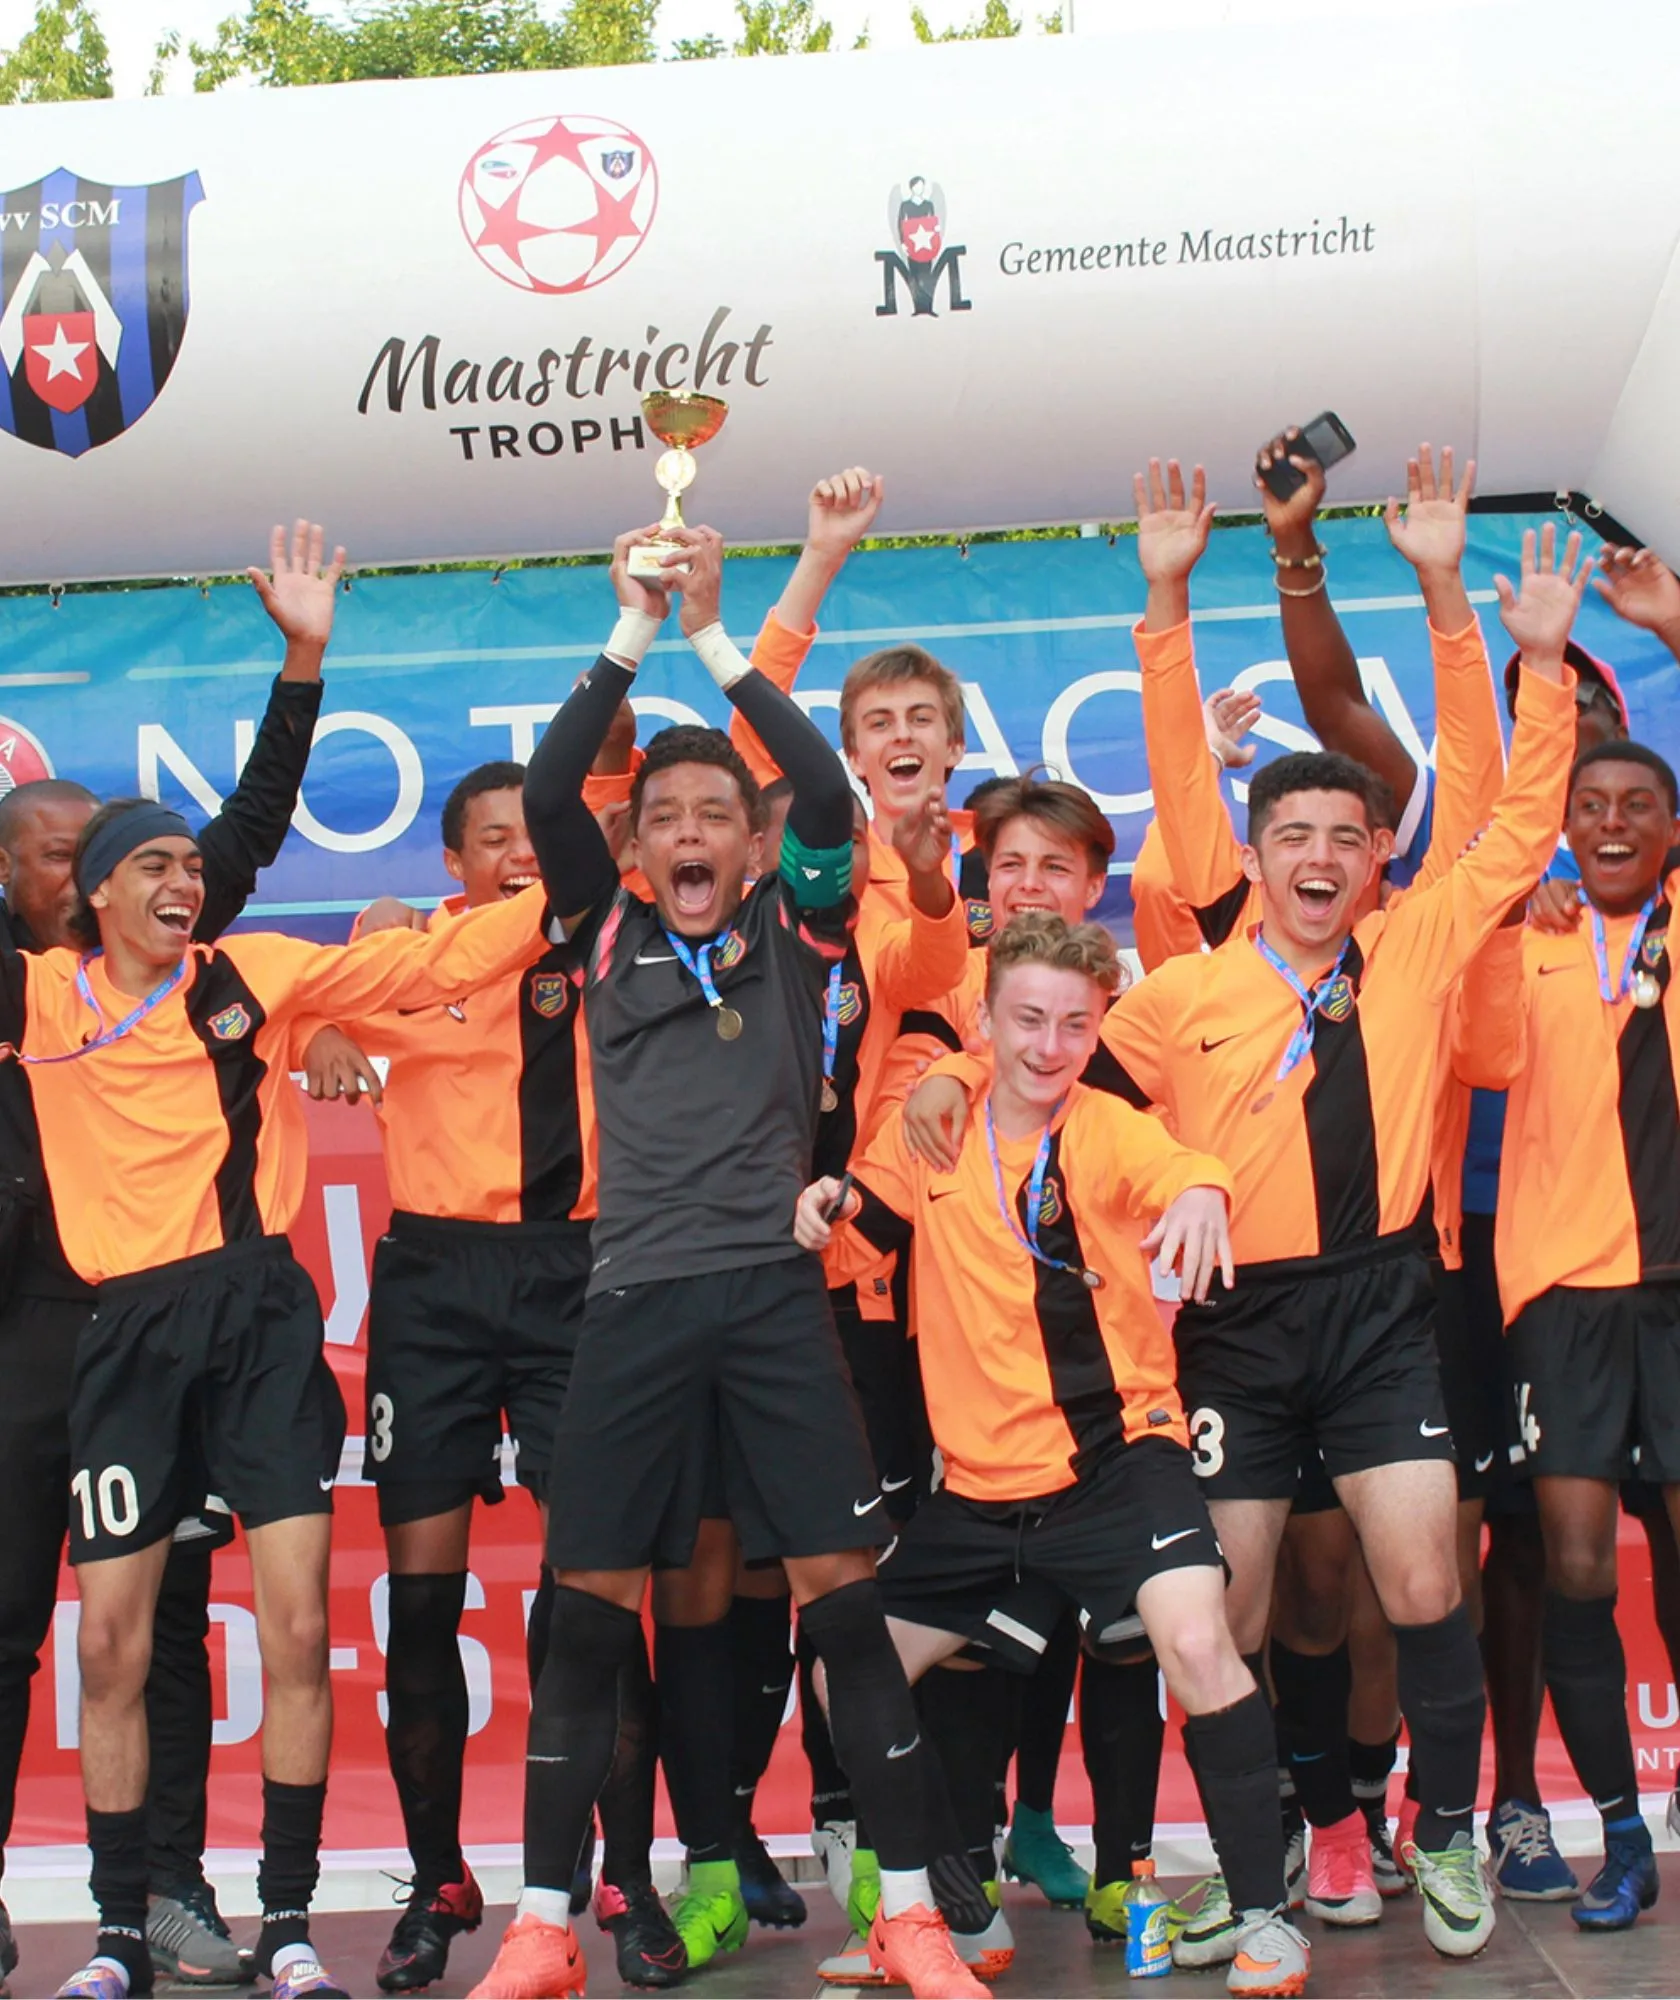 The Maastricht Trophy Highlights